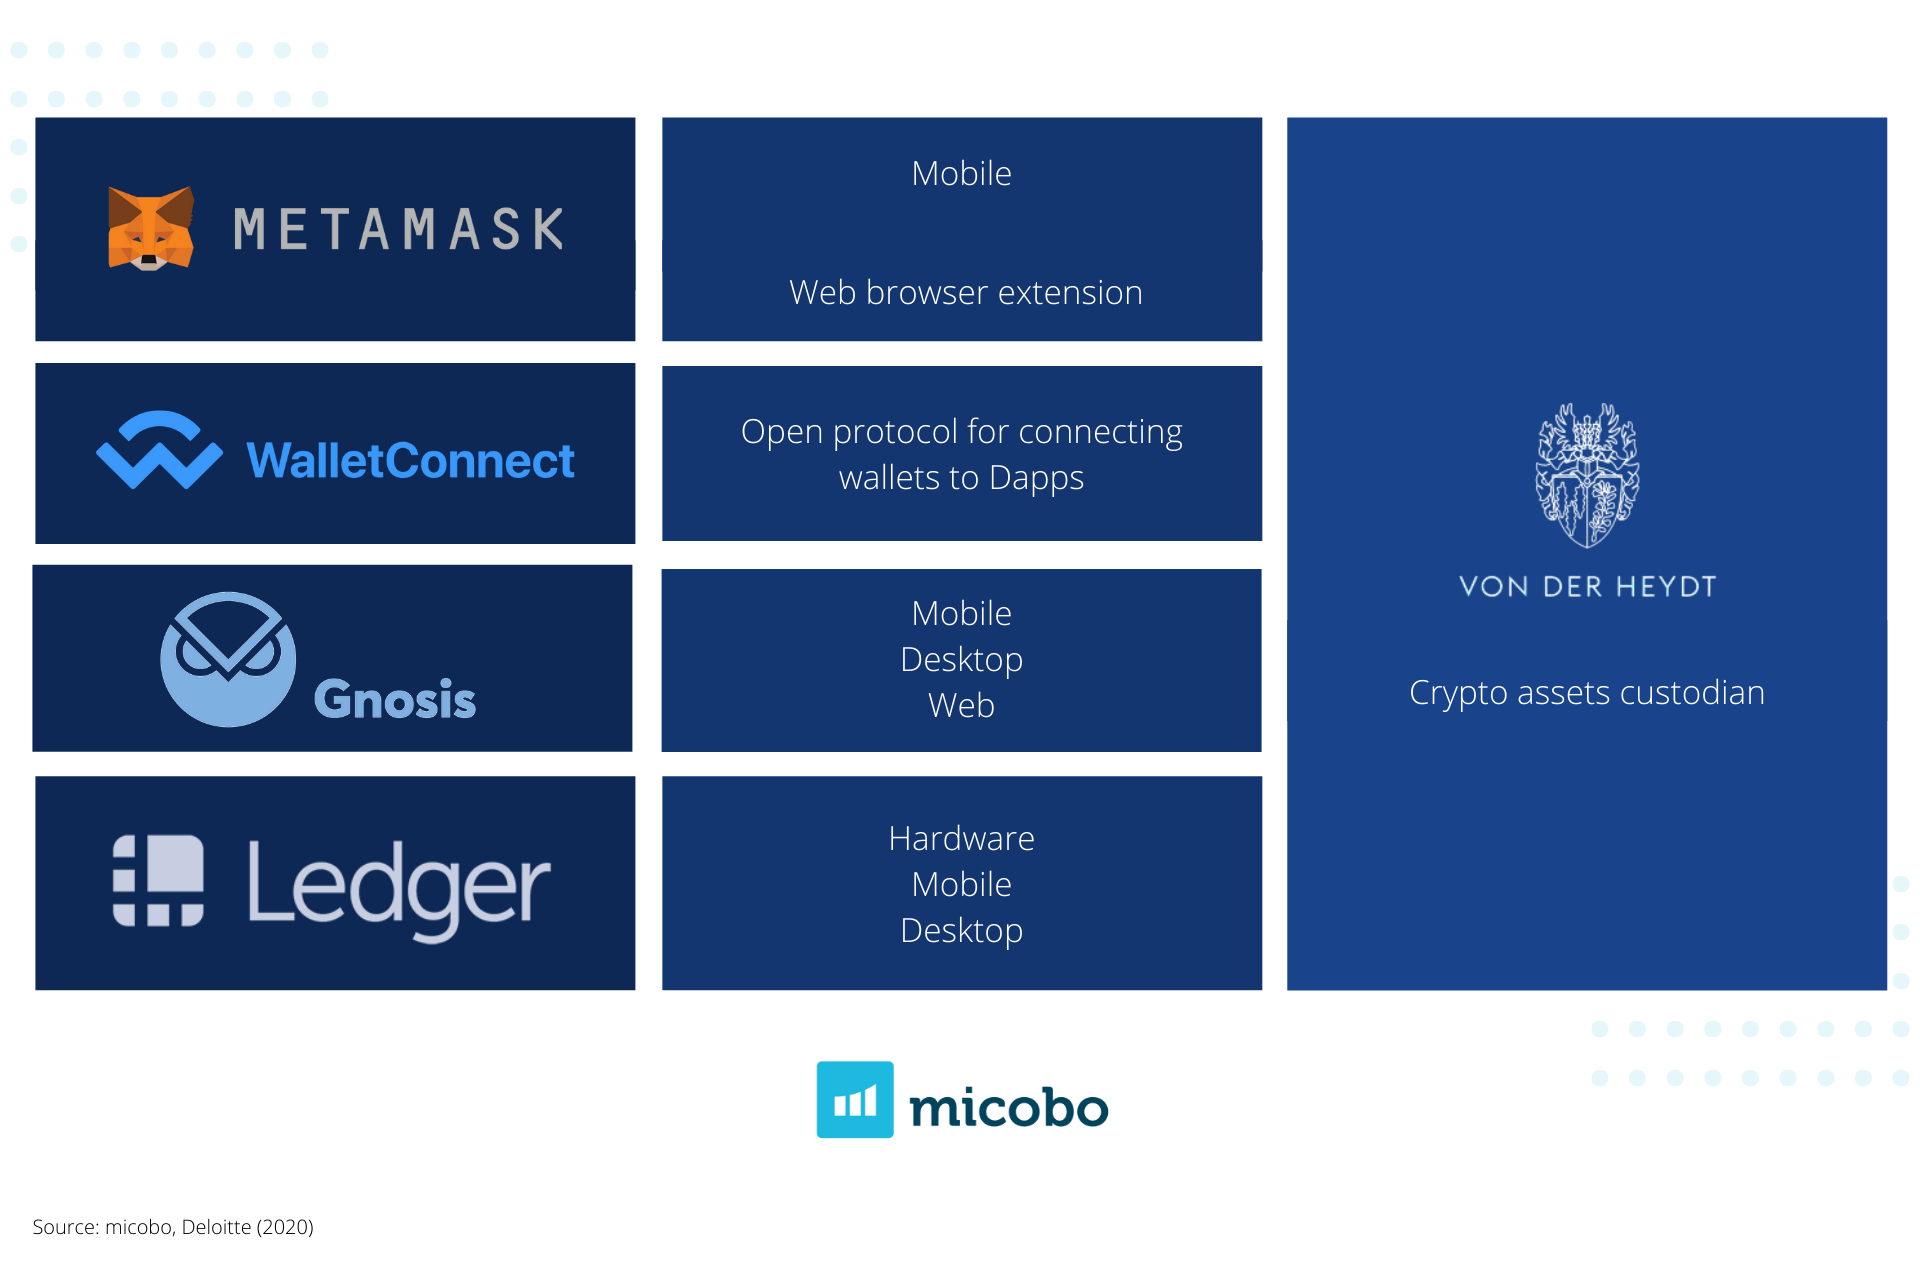 micobo’s integrated wallets by default.